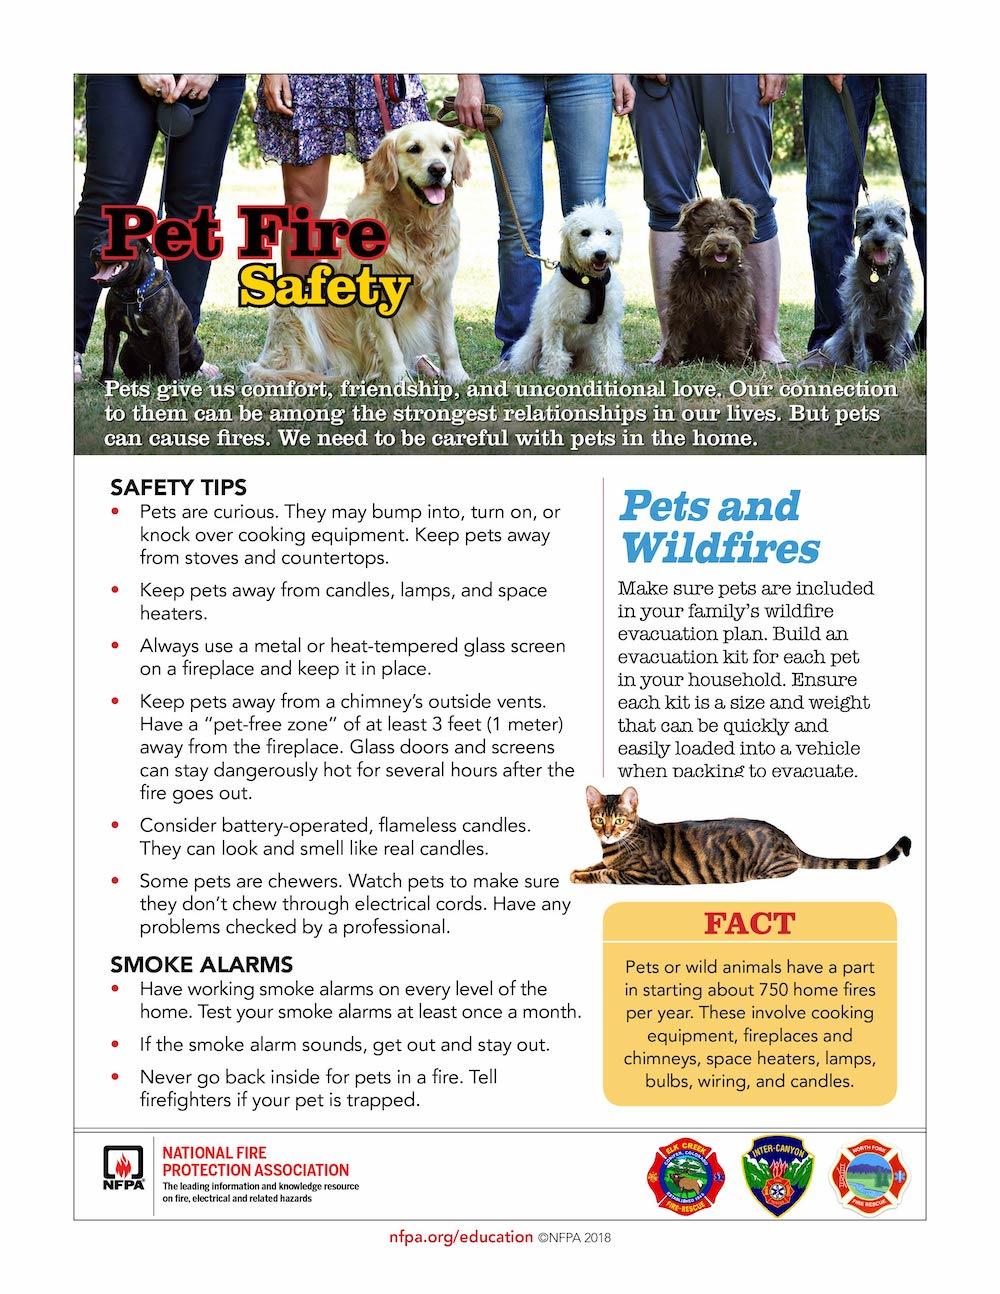 National Pet Fire Safety Day Tips from National Fire Protection Association